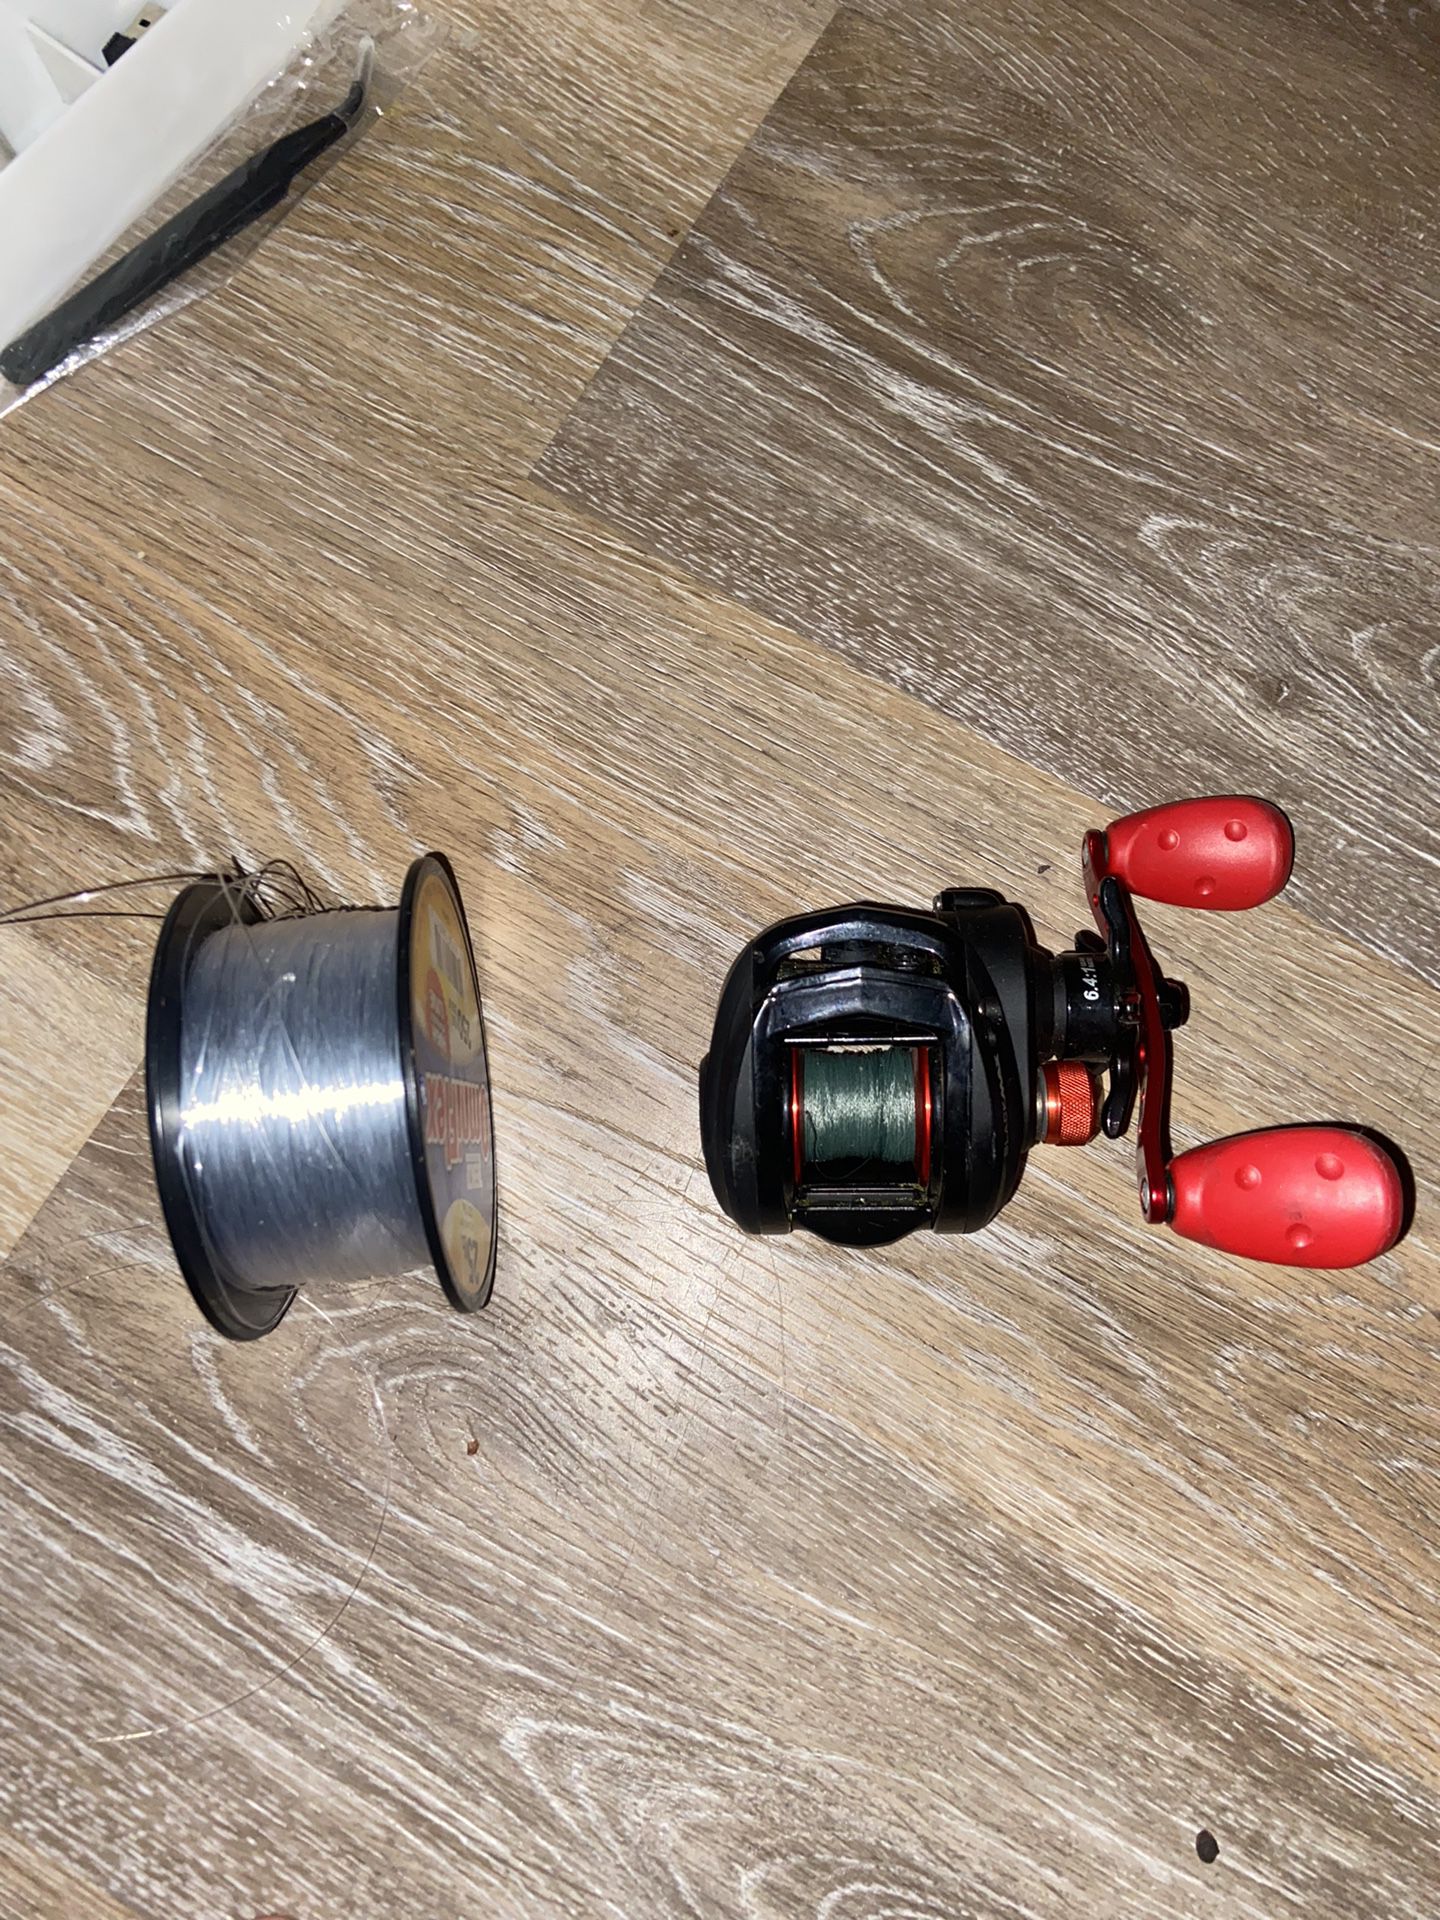 Abu Garcia Fishing Reel And It Comes With The Fishing Line